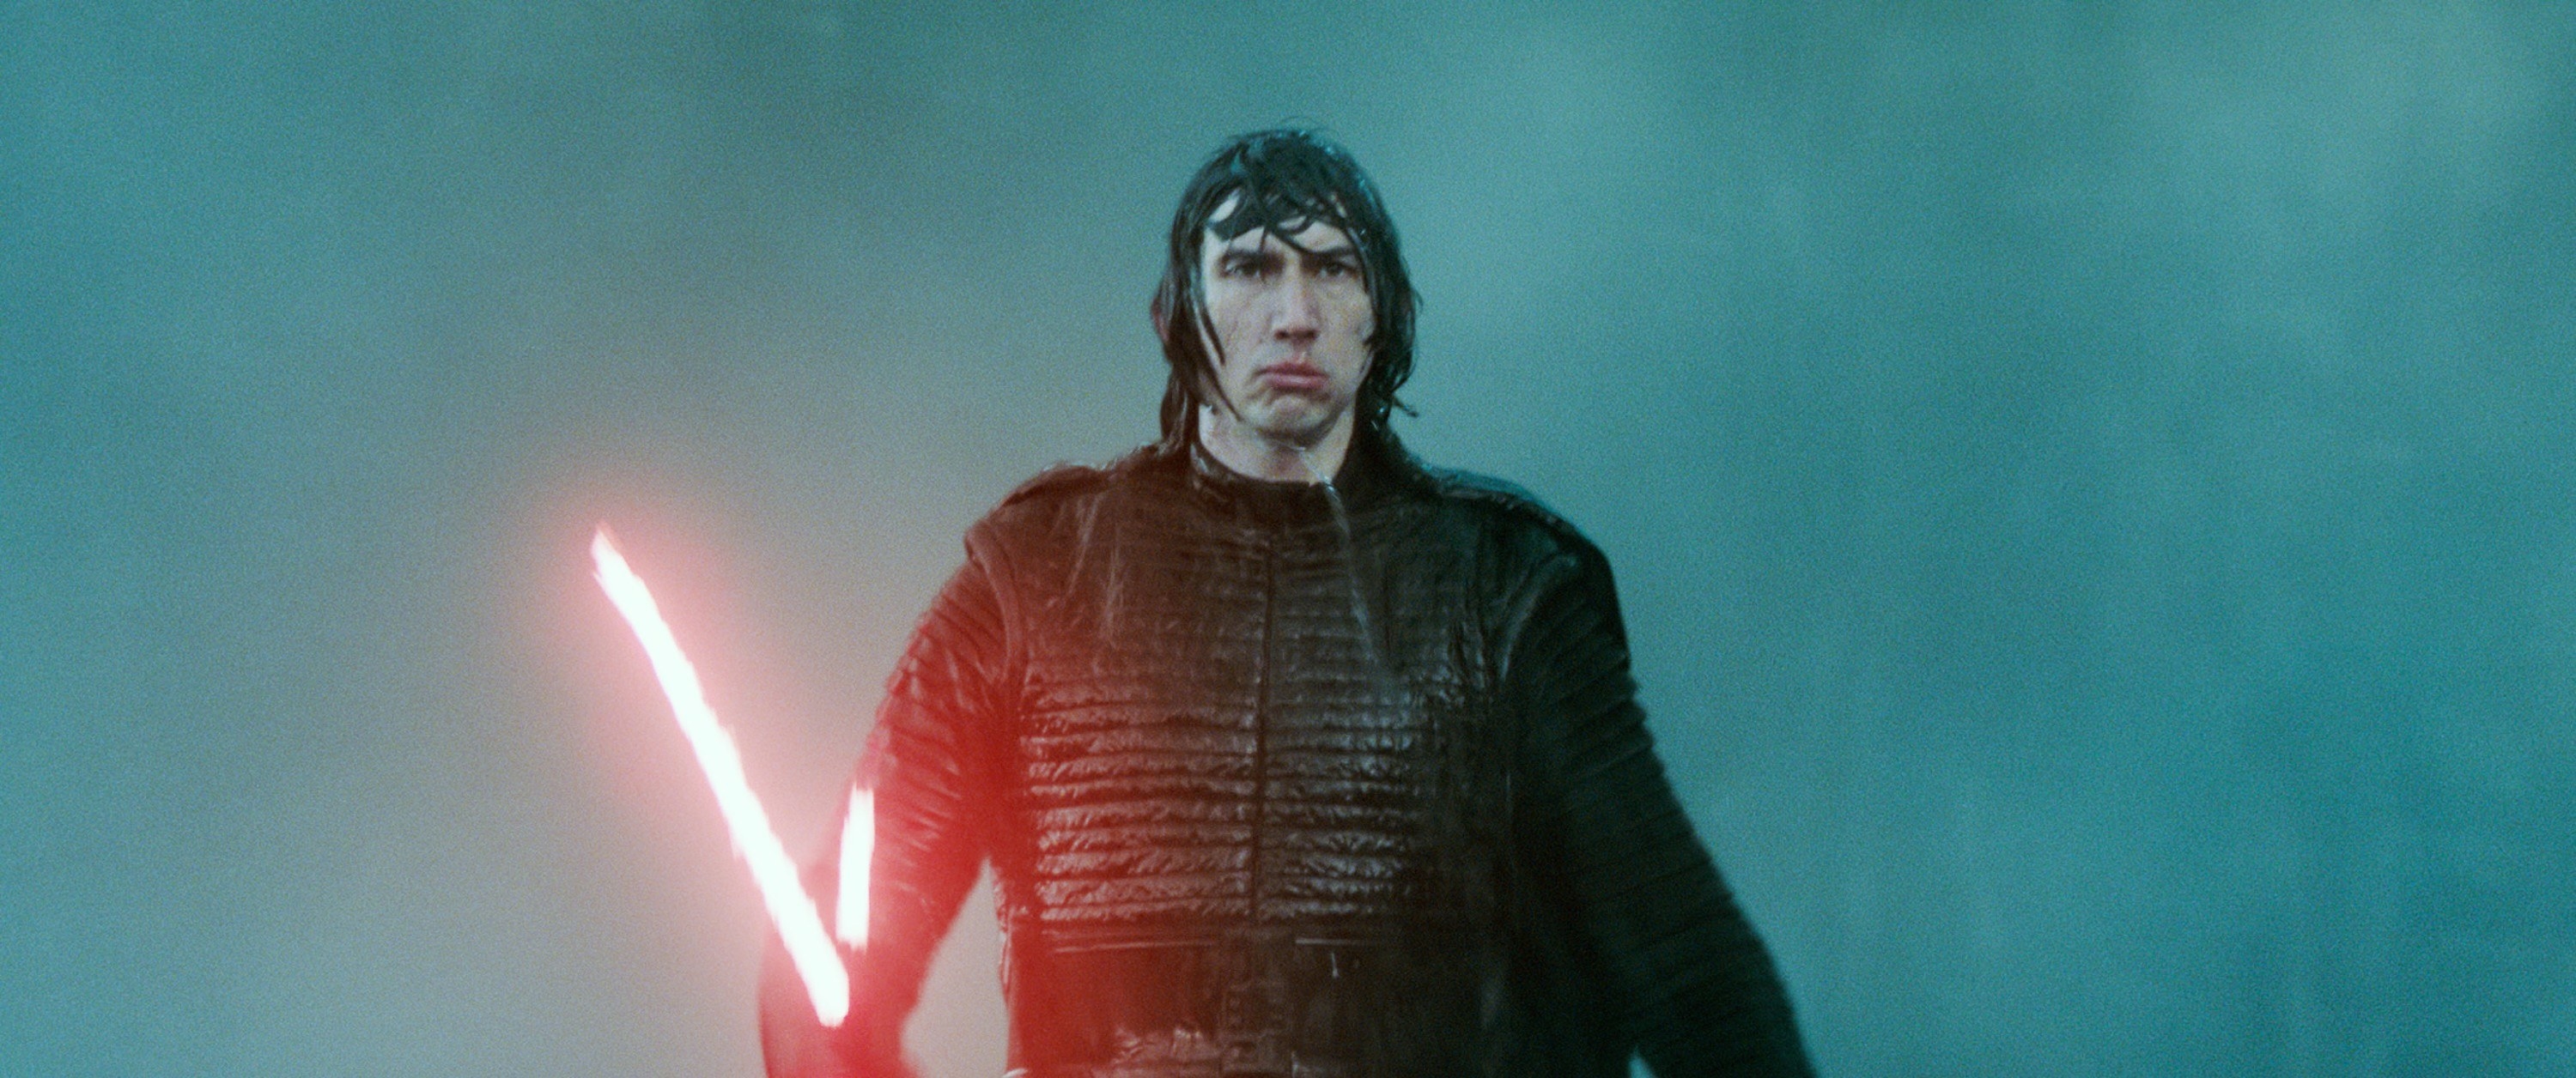 Kylo Ren holding his iconic lightsaber in &quot;Star Wars&quot;